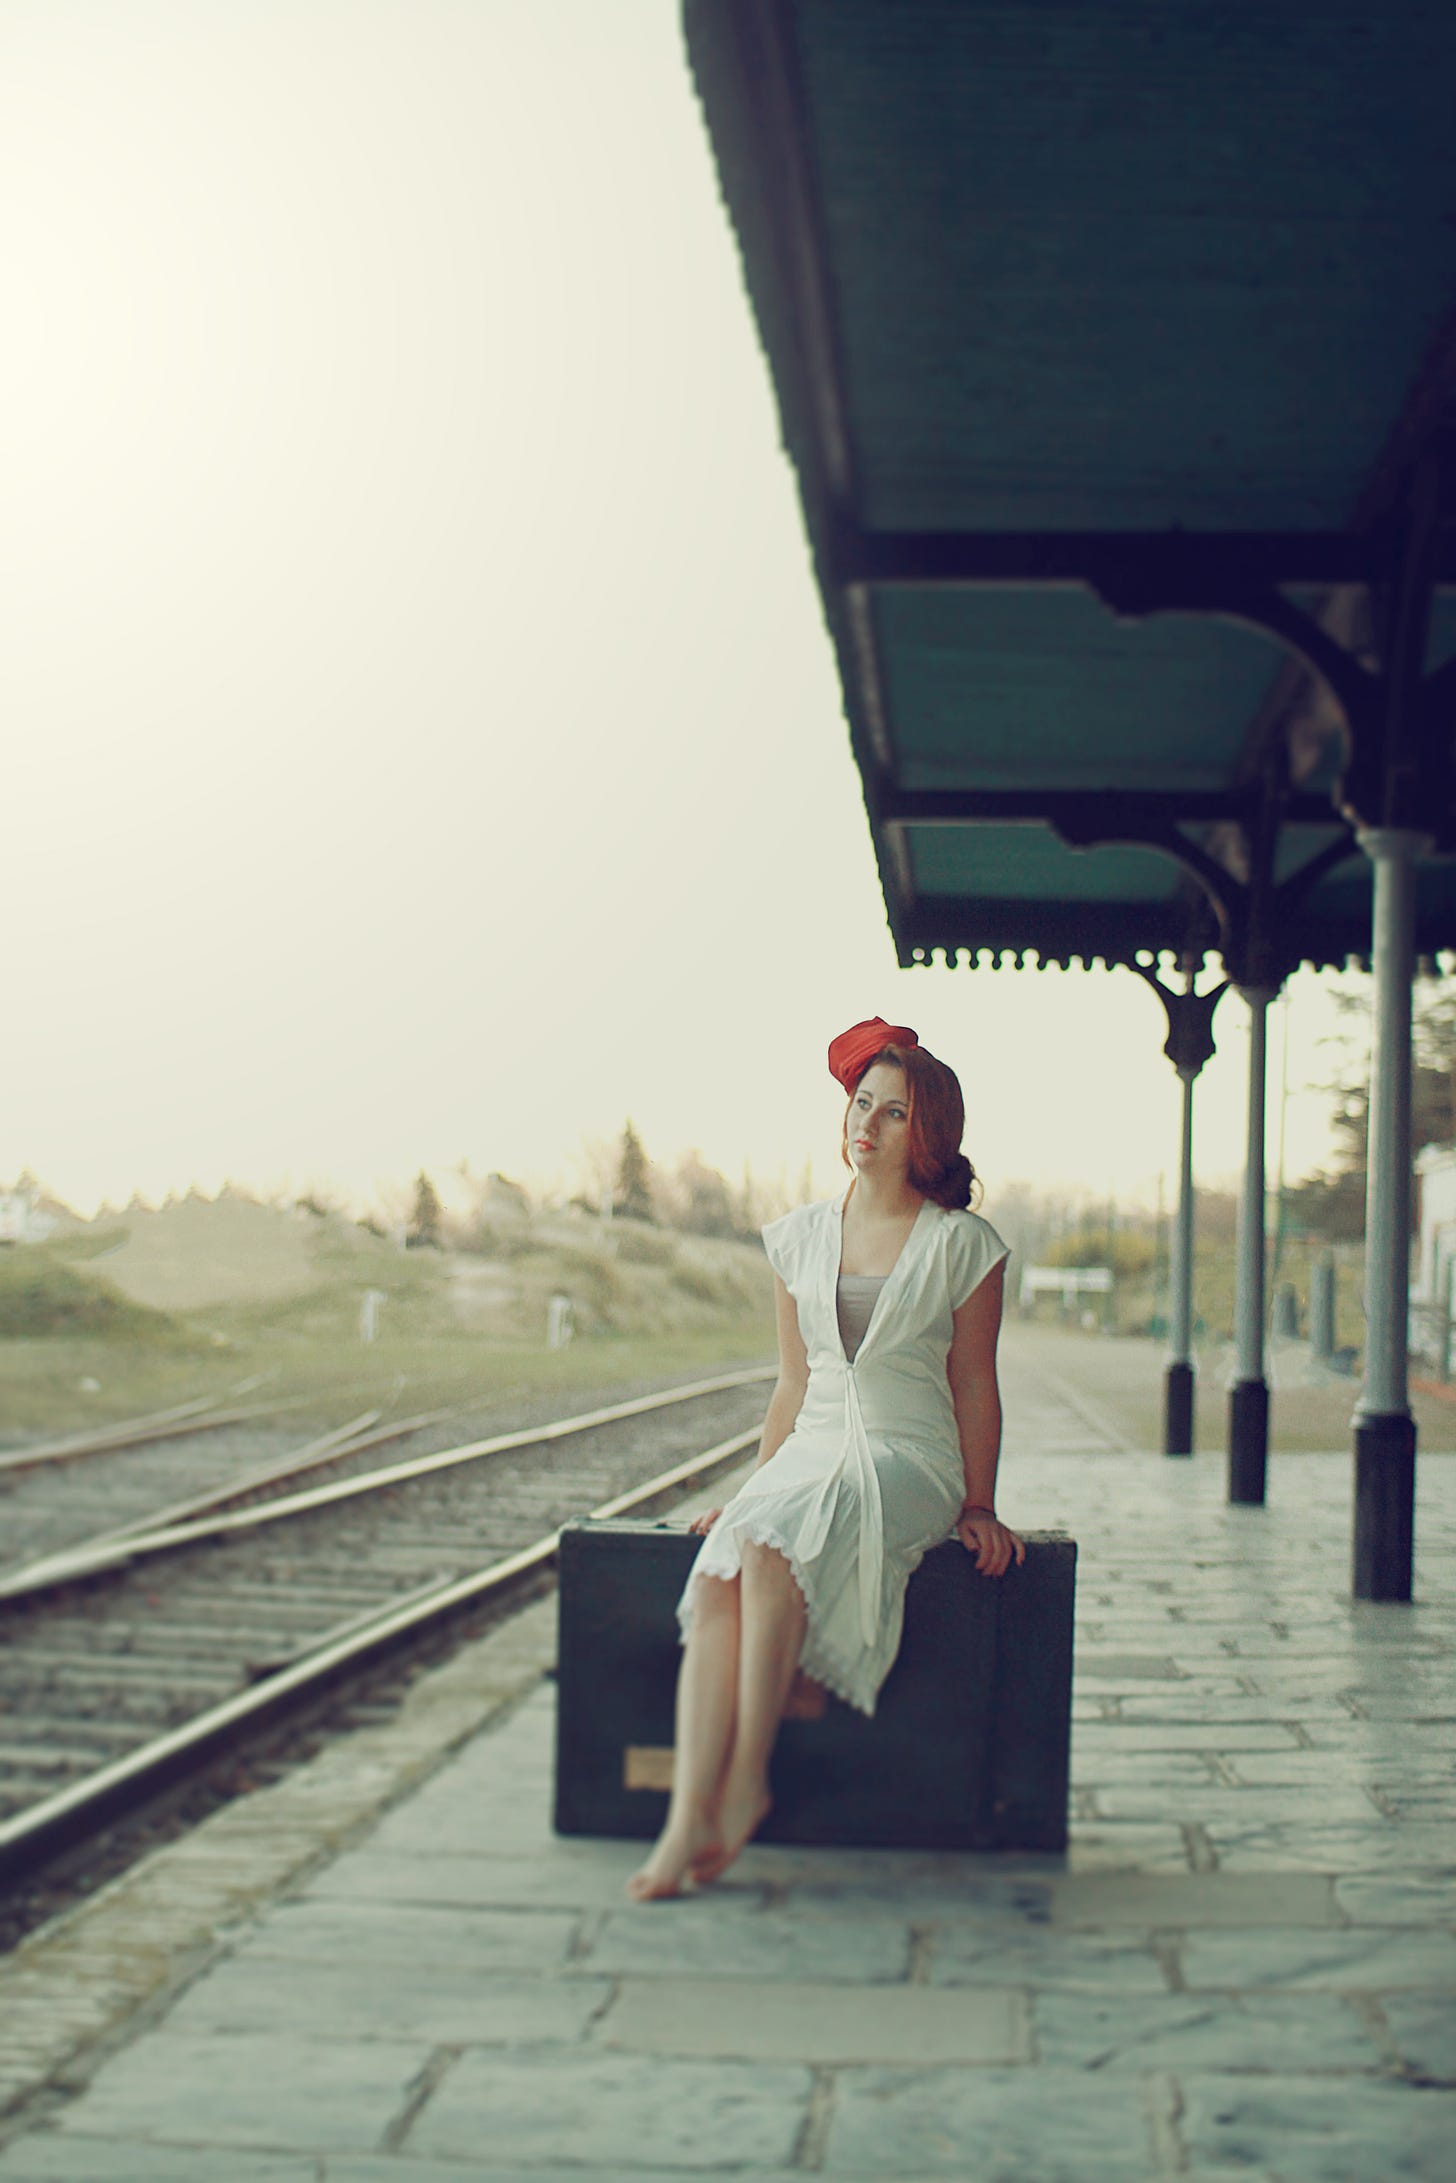 A woman waiting for a train.